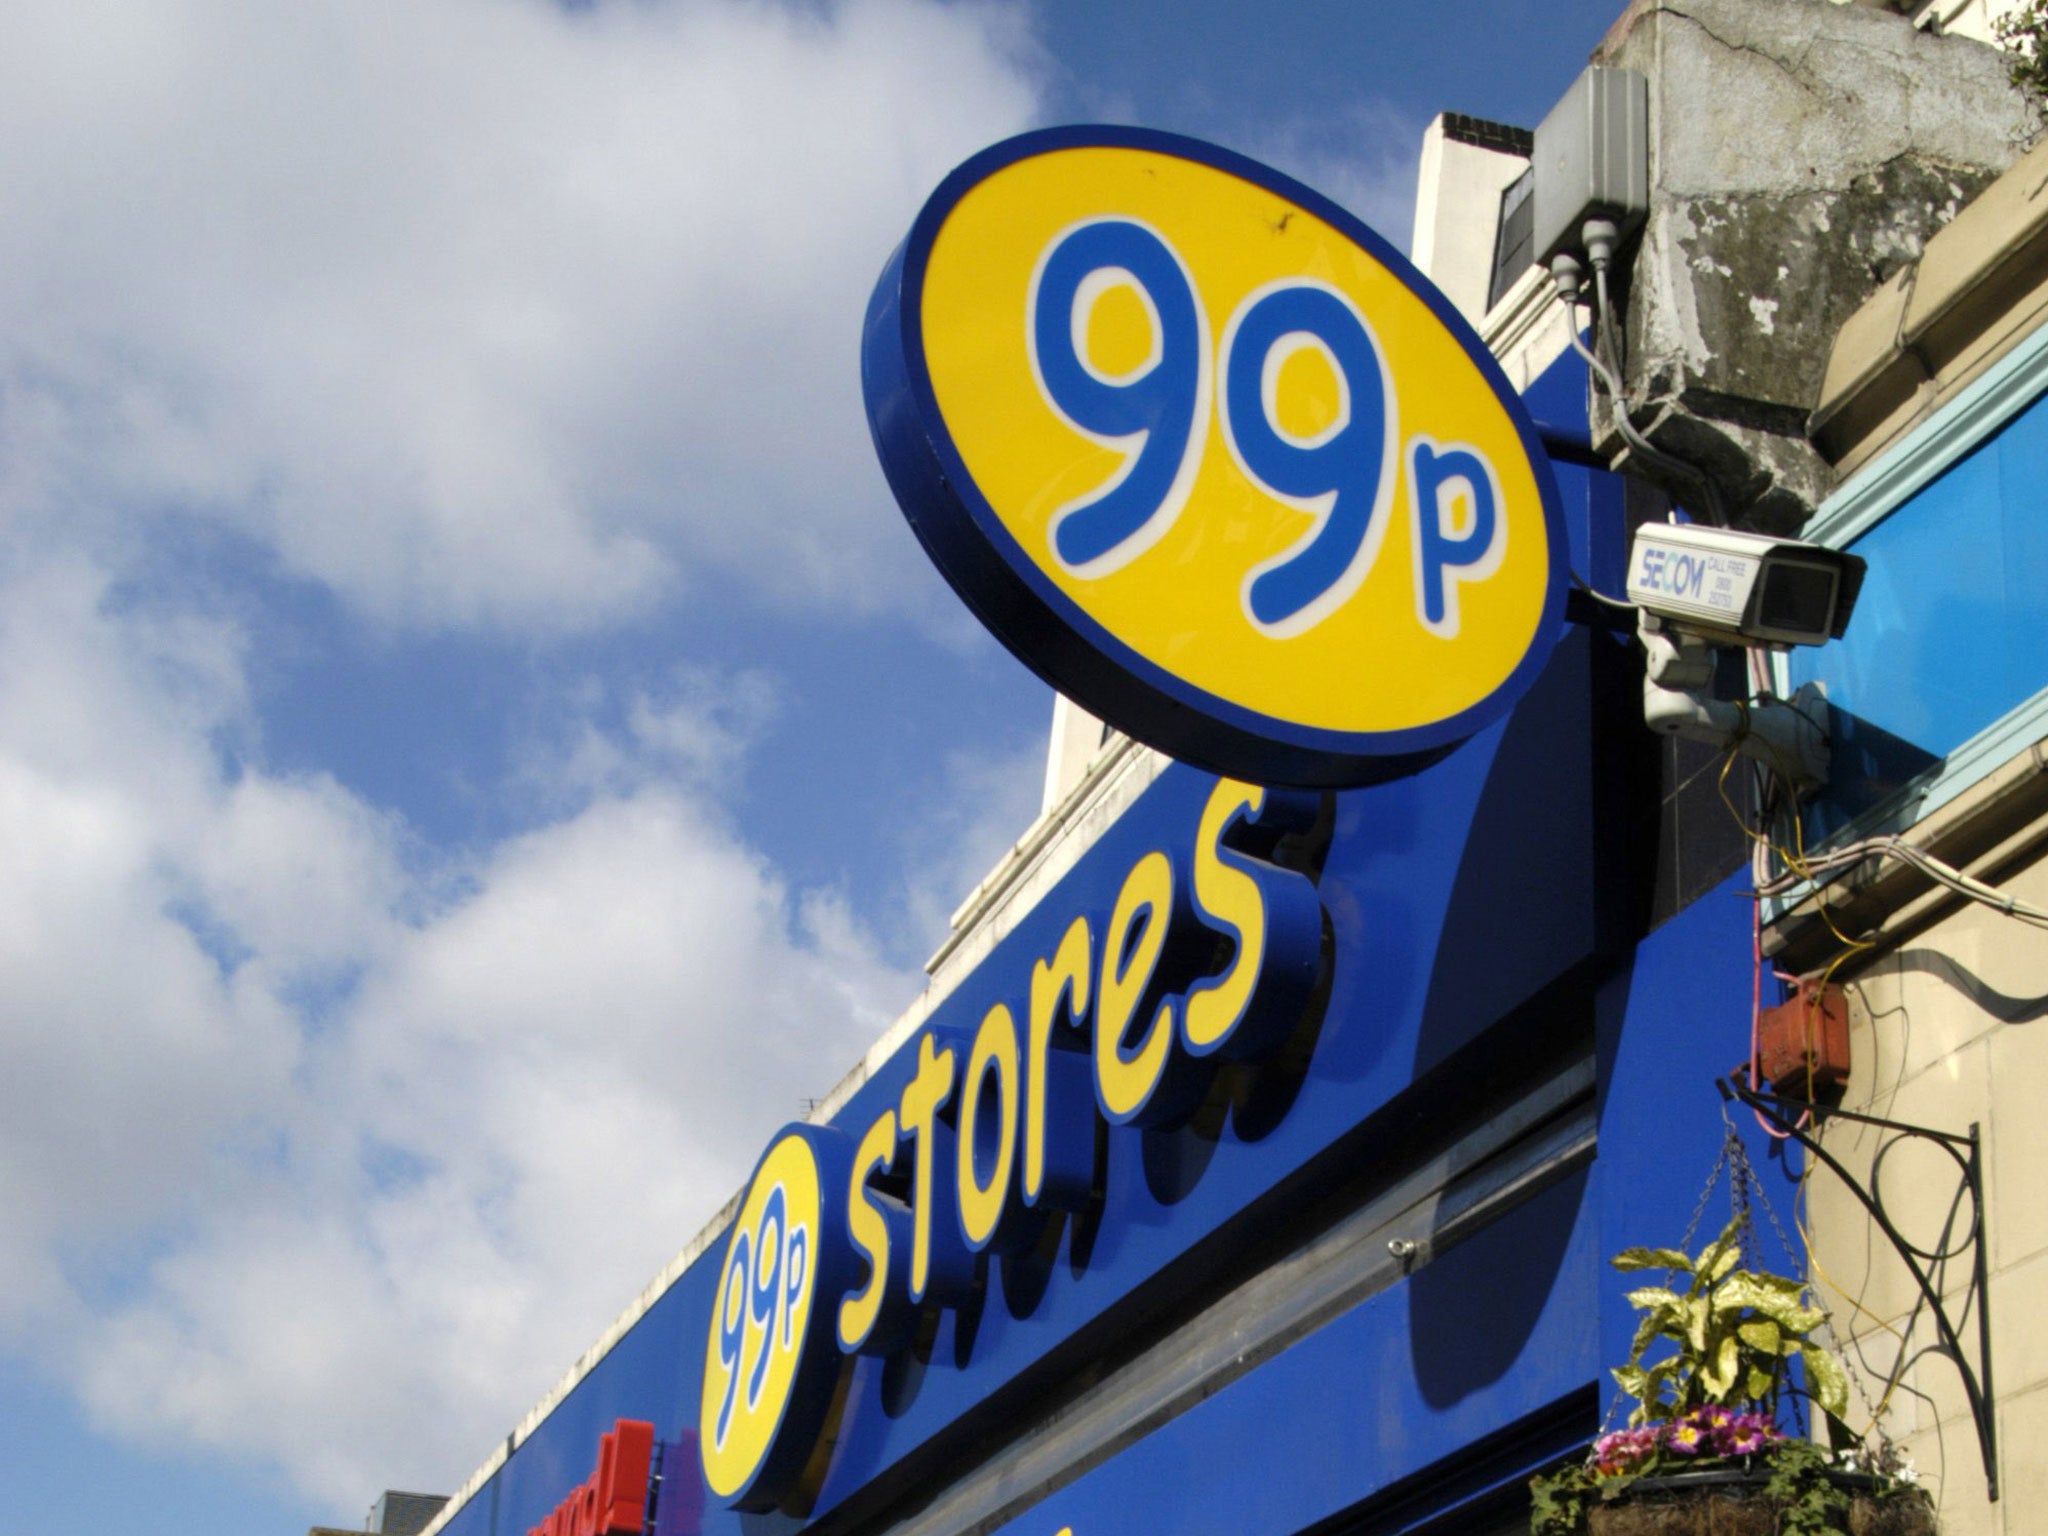 Although discount retailers featured more rarely in the 2013 Hot 100, 99p Stores did register the 10th highest sales